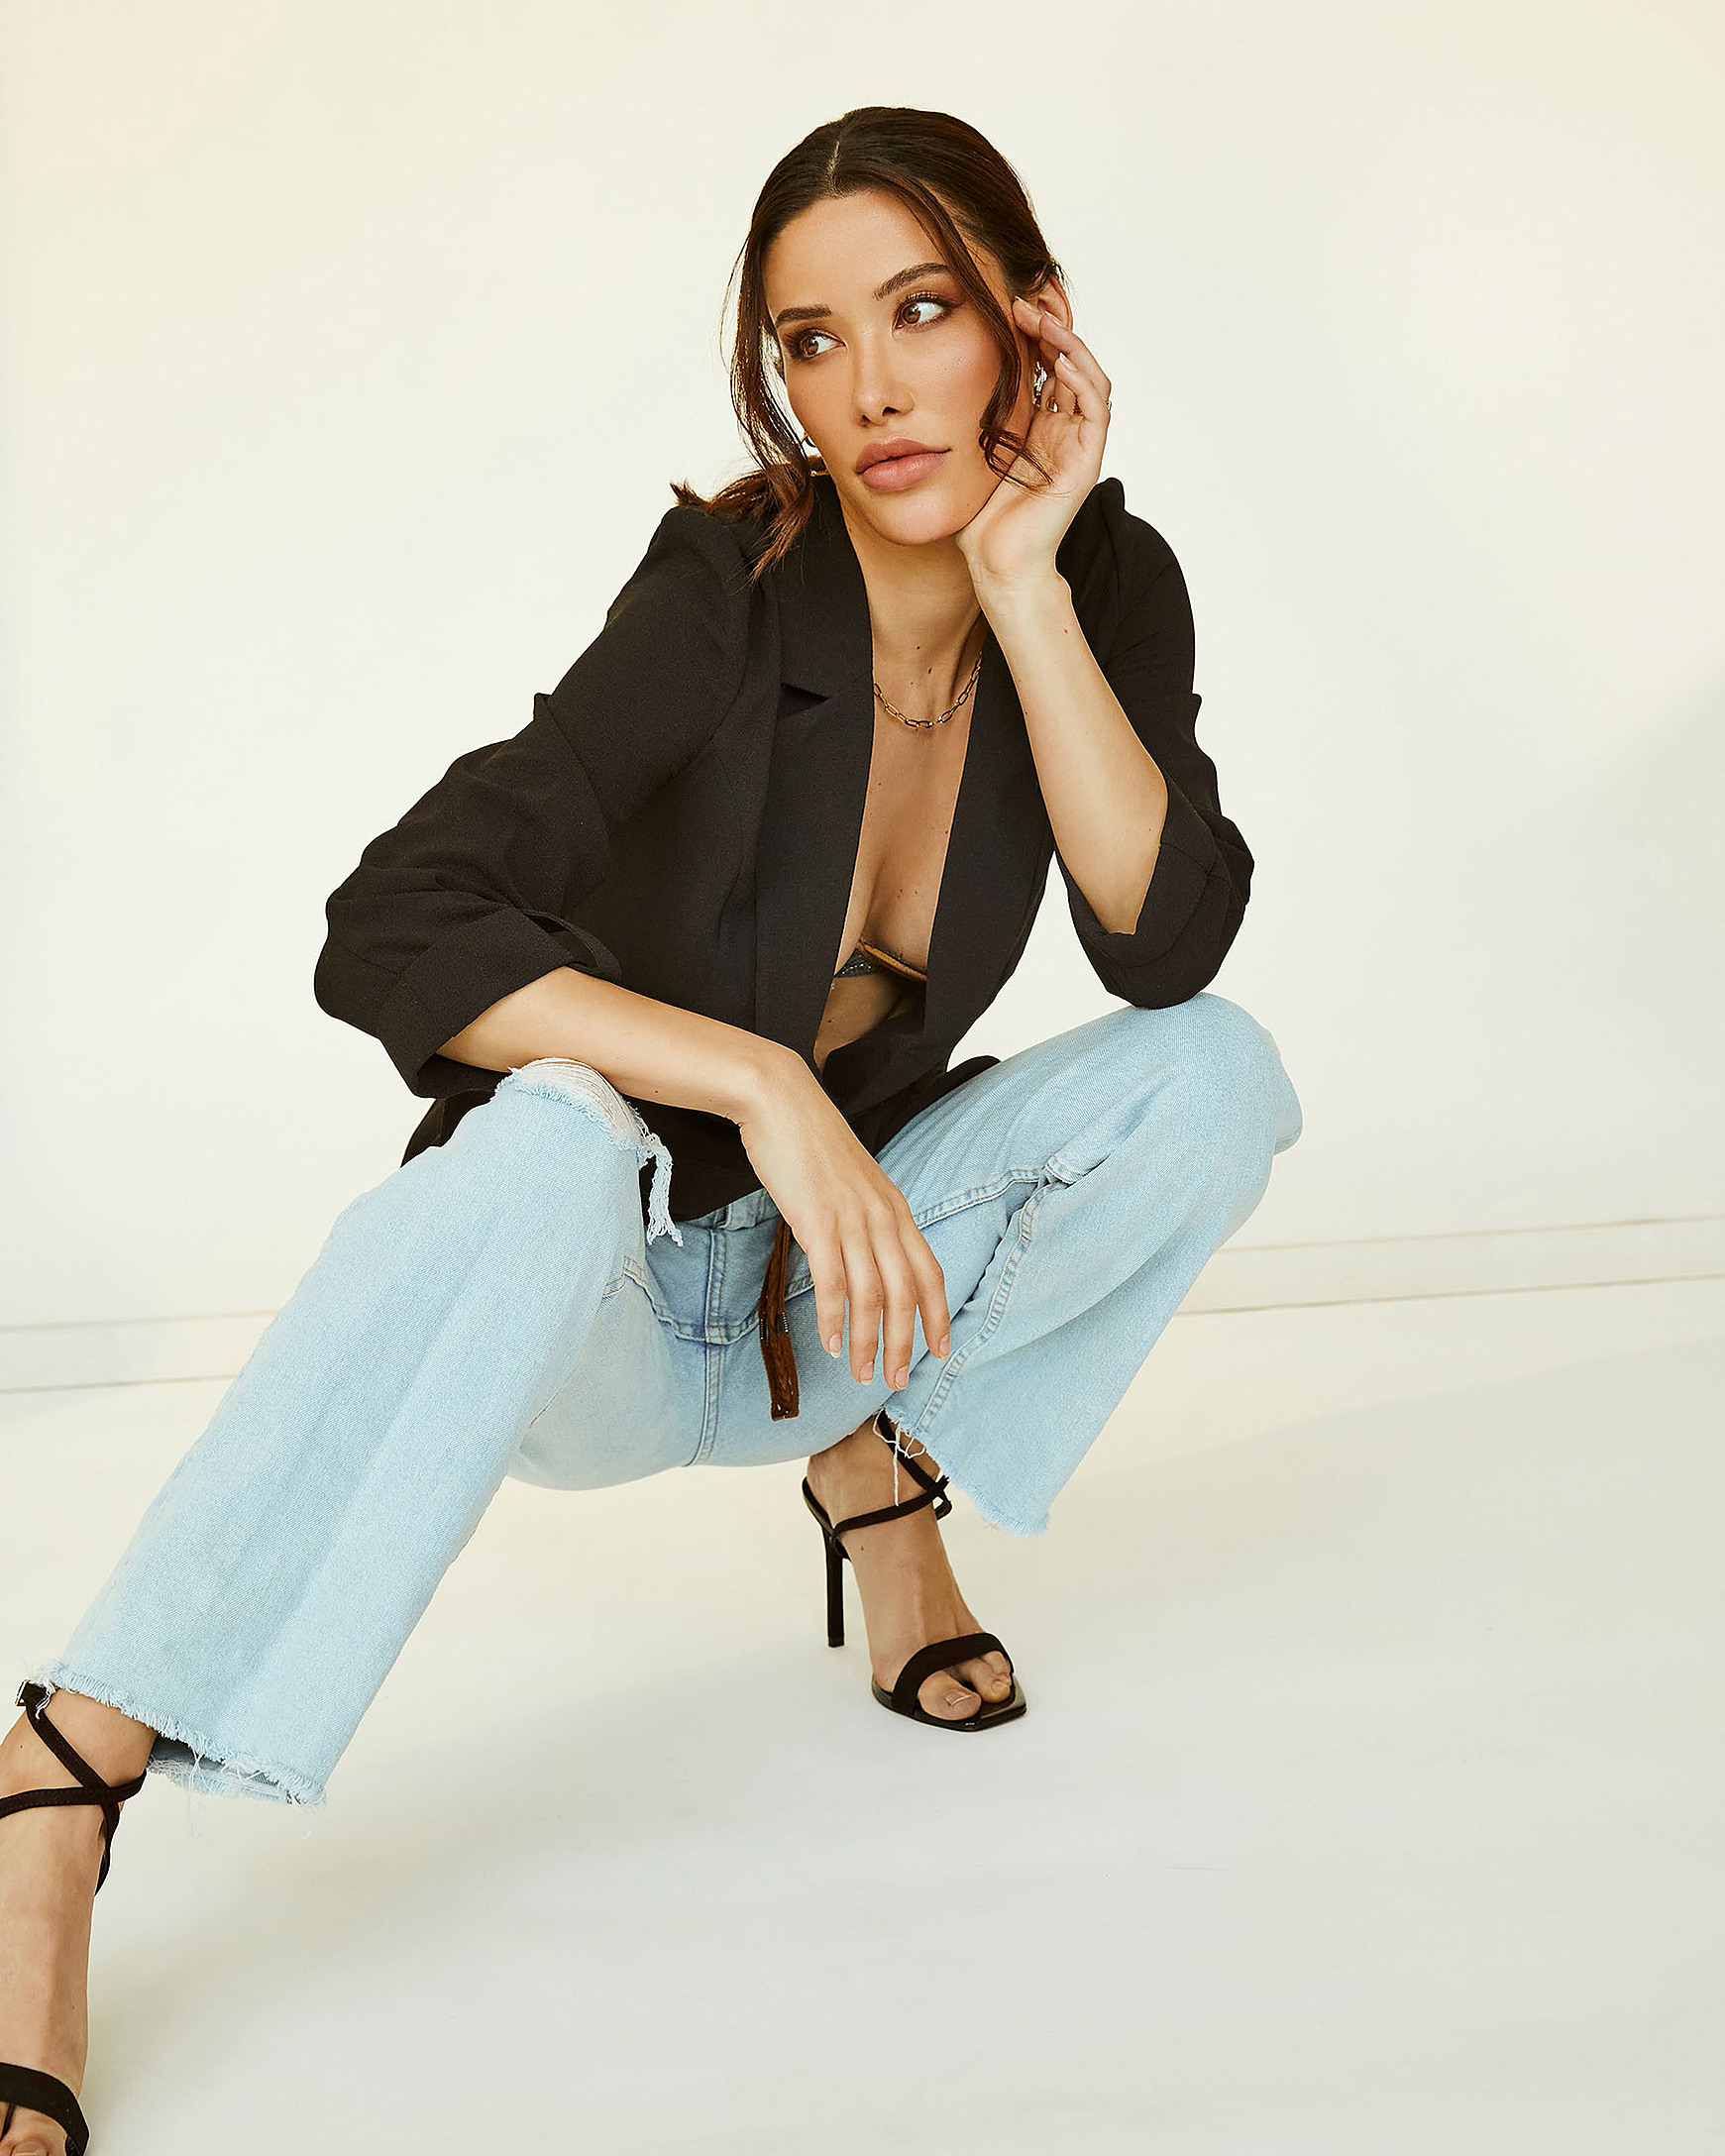 A female model squats in denim and a black jacket